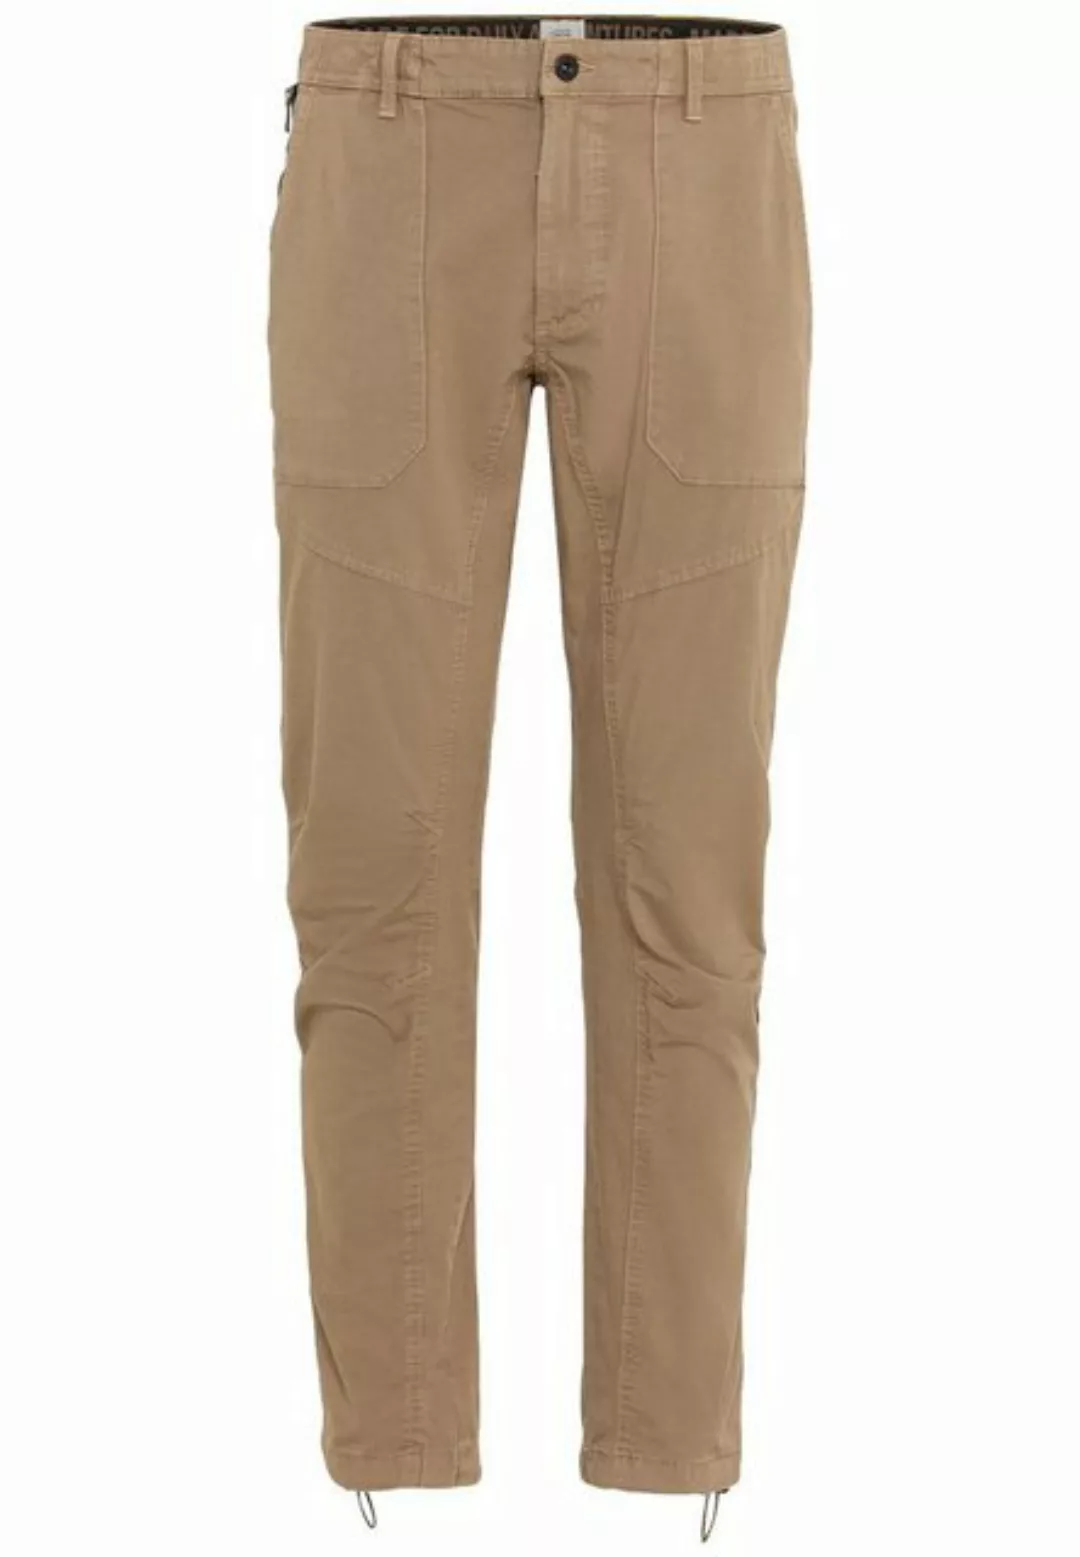 camel active Chinohose Casual Pants Chino, Wood günstig online kaufen